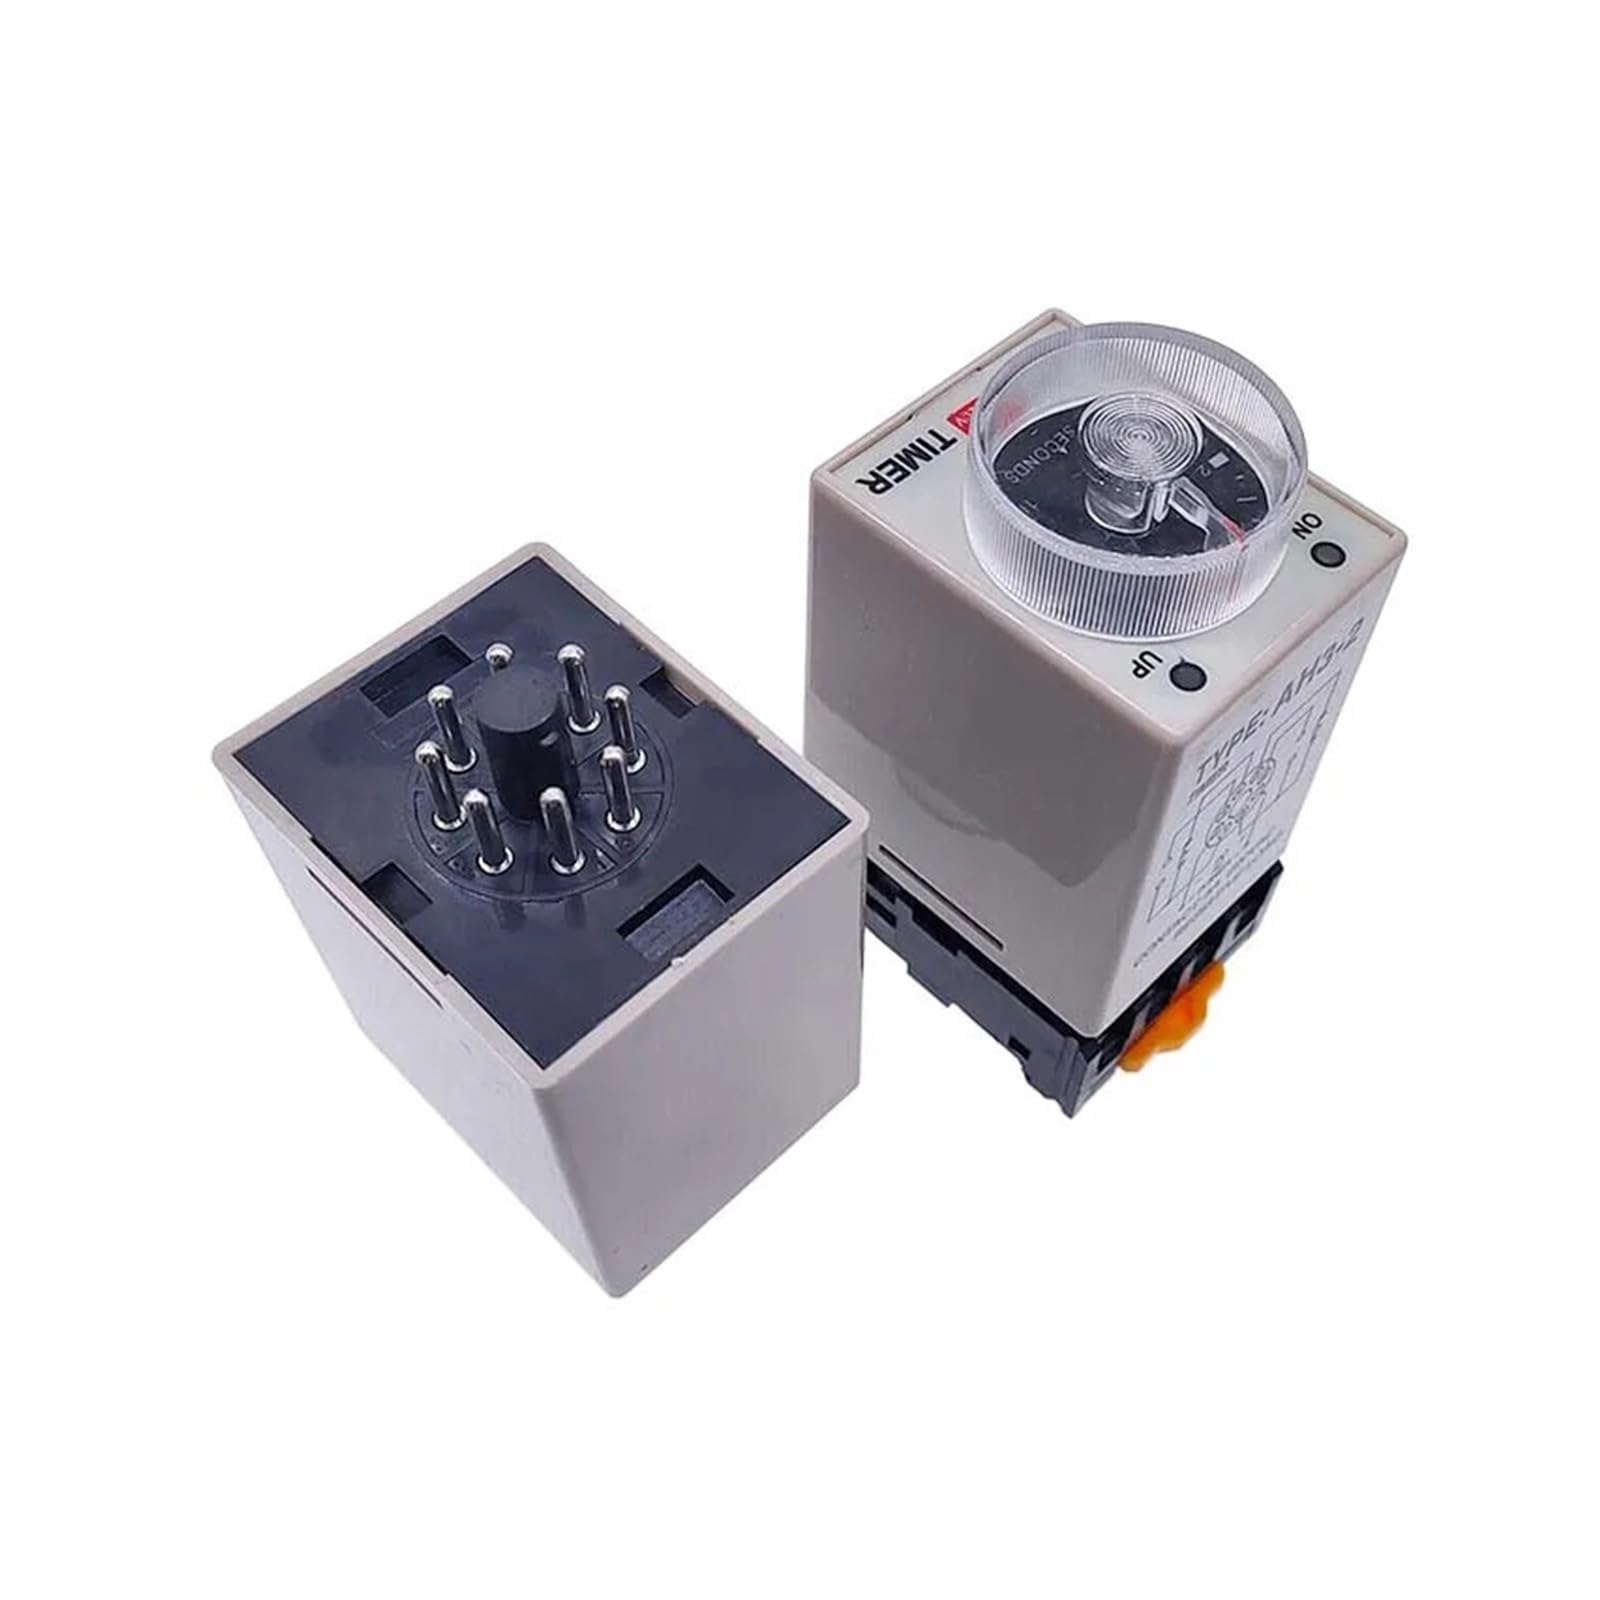 1 PC AH3-2 Power-on Delay Timer AH3-3 Time Relay AC Thick Stitch Time Set Range 1S/5S/10S/30S/60S/5M/10M/30M NWPNLXEA(AC110V,AH3-2 0-6Seconds) von NWPNLXEA